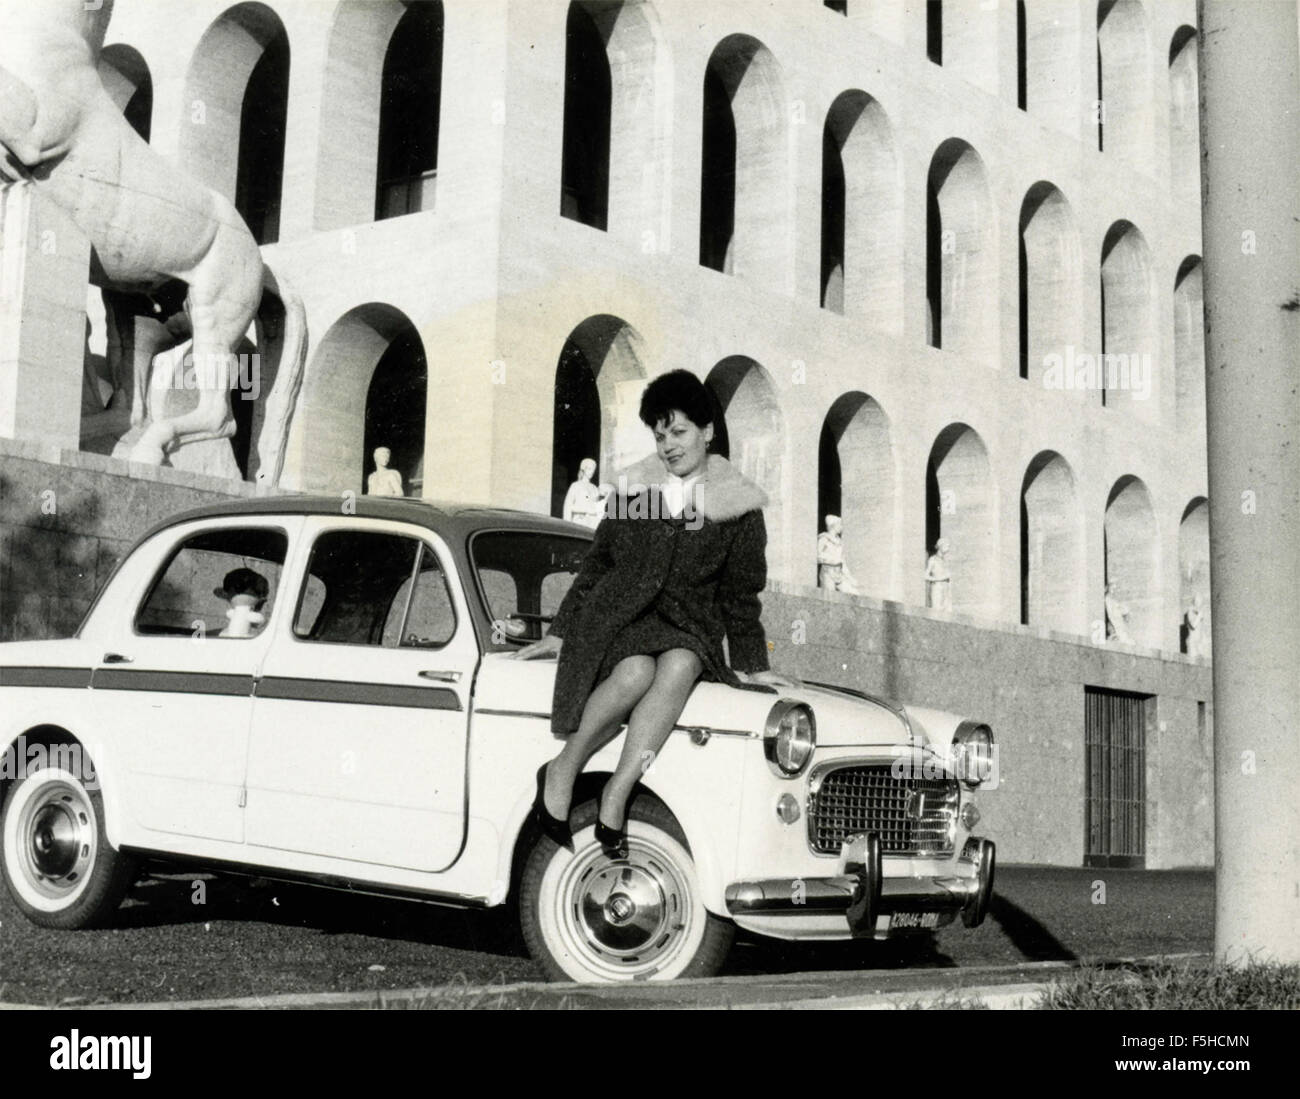 A woman sitting on a car FIAT bicolor 1100, Rome, Italy Stock Photo - Alamy